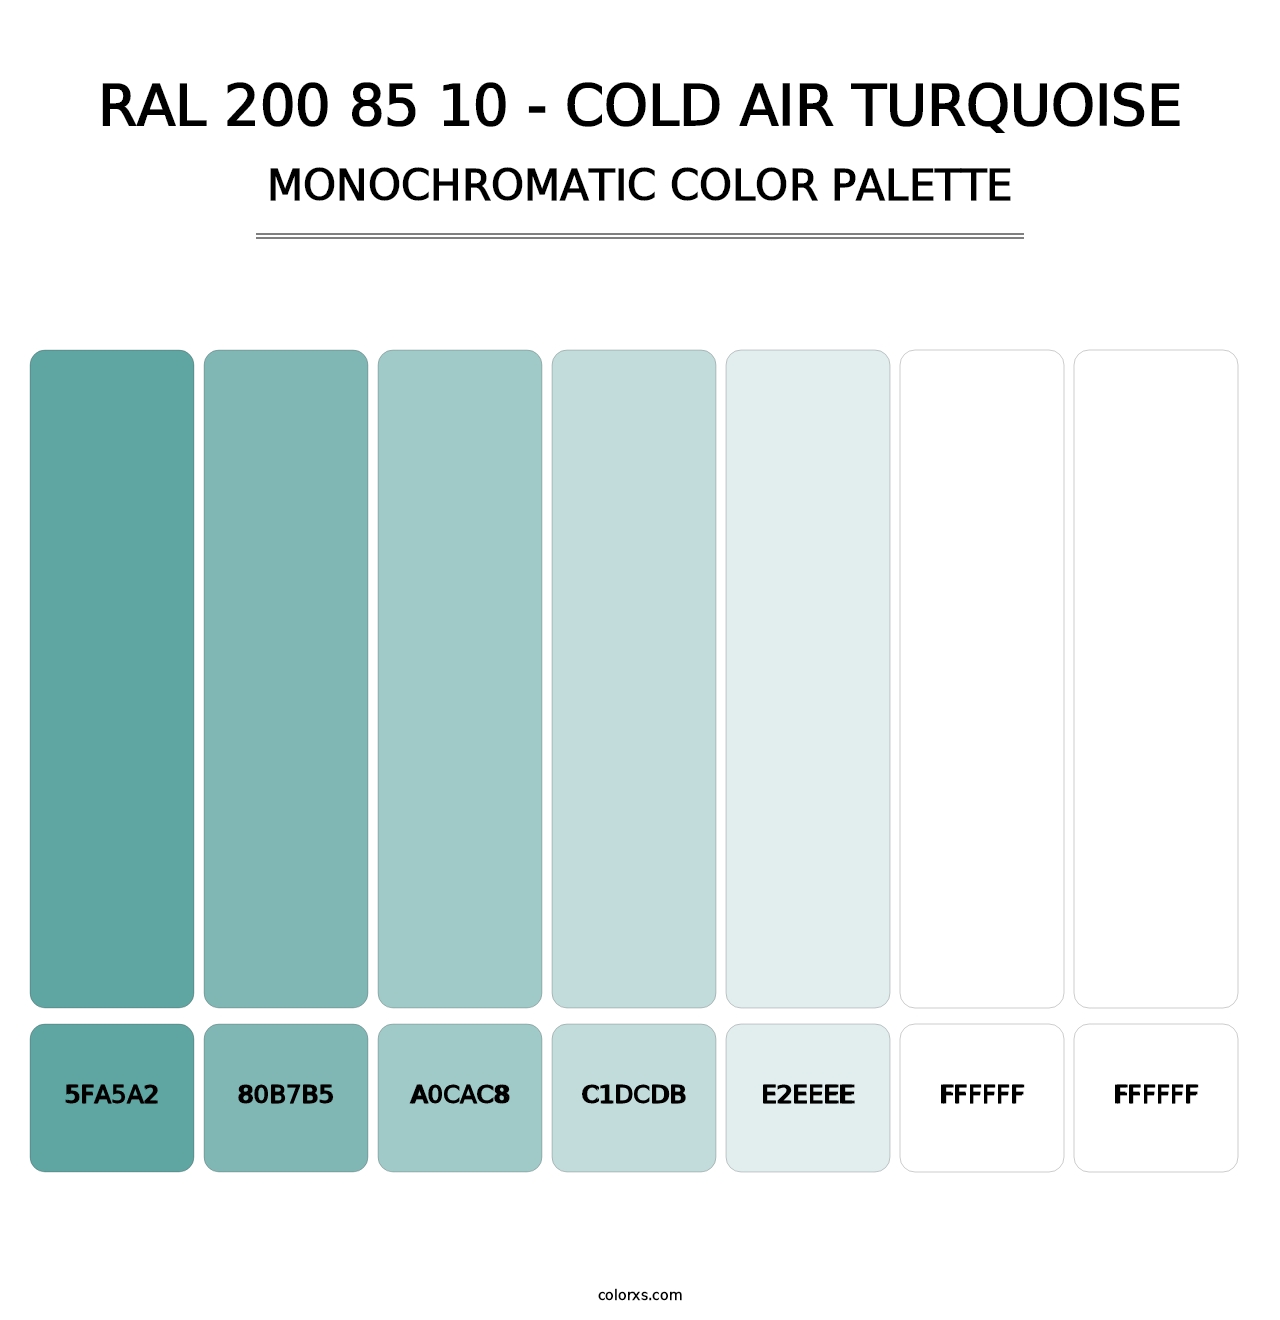 RAL 200 85 10 - Cold Air Turquoise - Monochromatic Color Palette